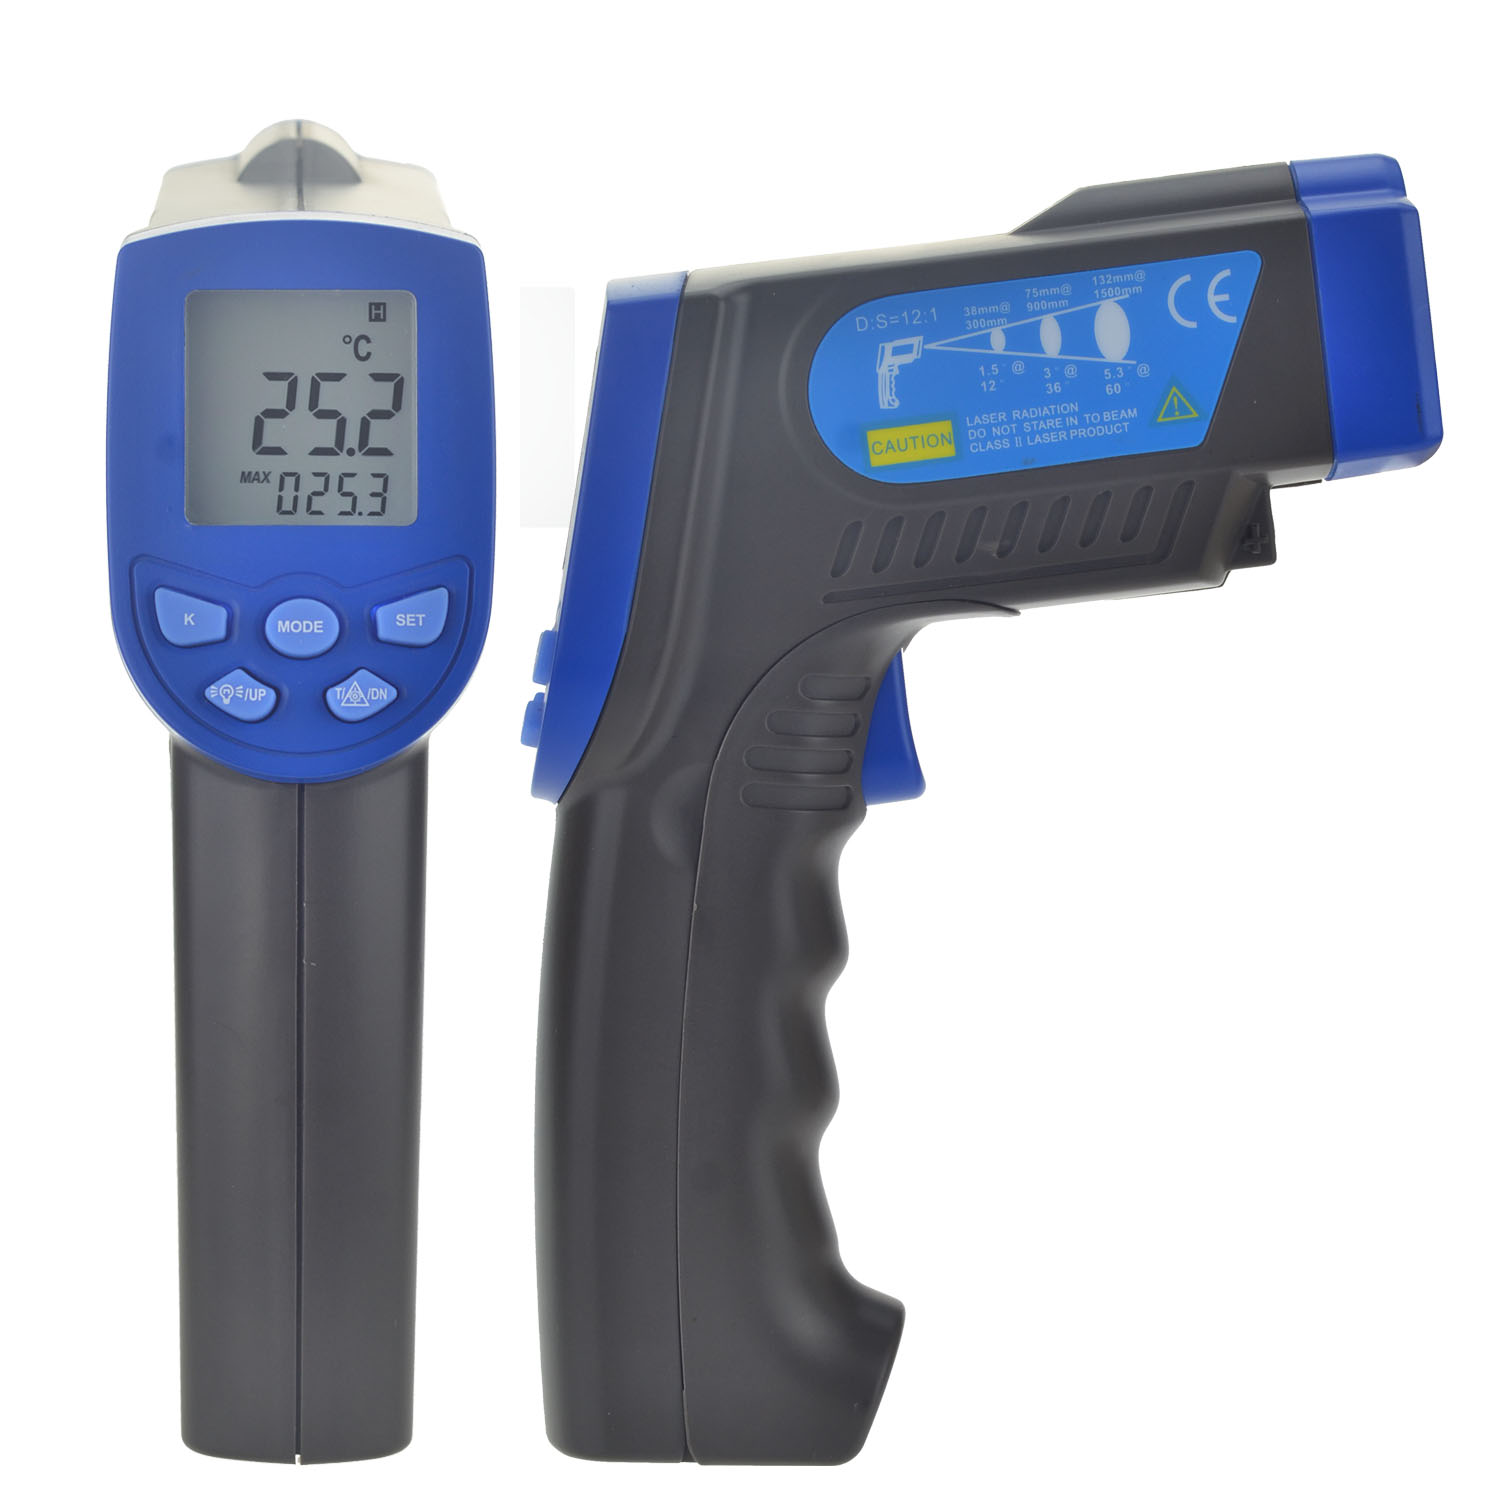 HoldPeak hp1300 laser temperature gun accuracy Suppliers for inspection